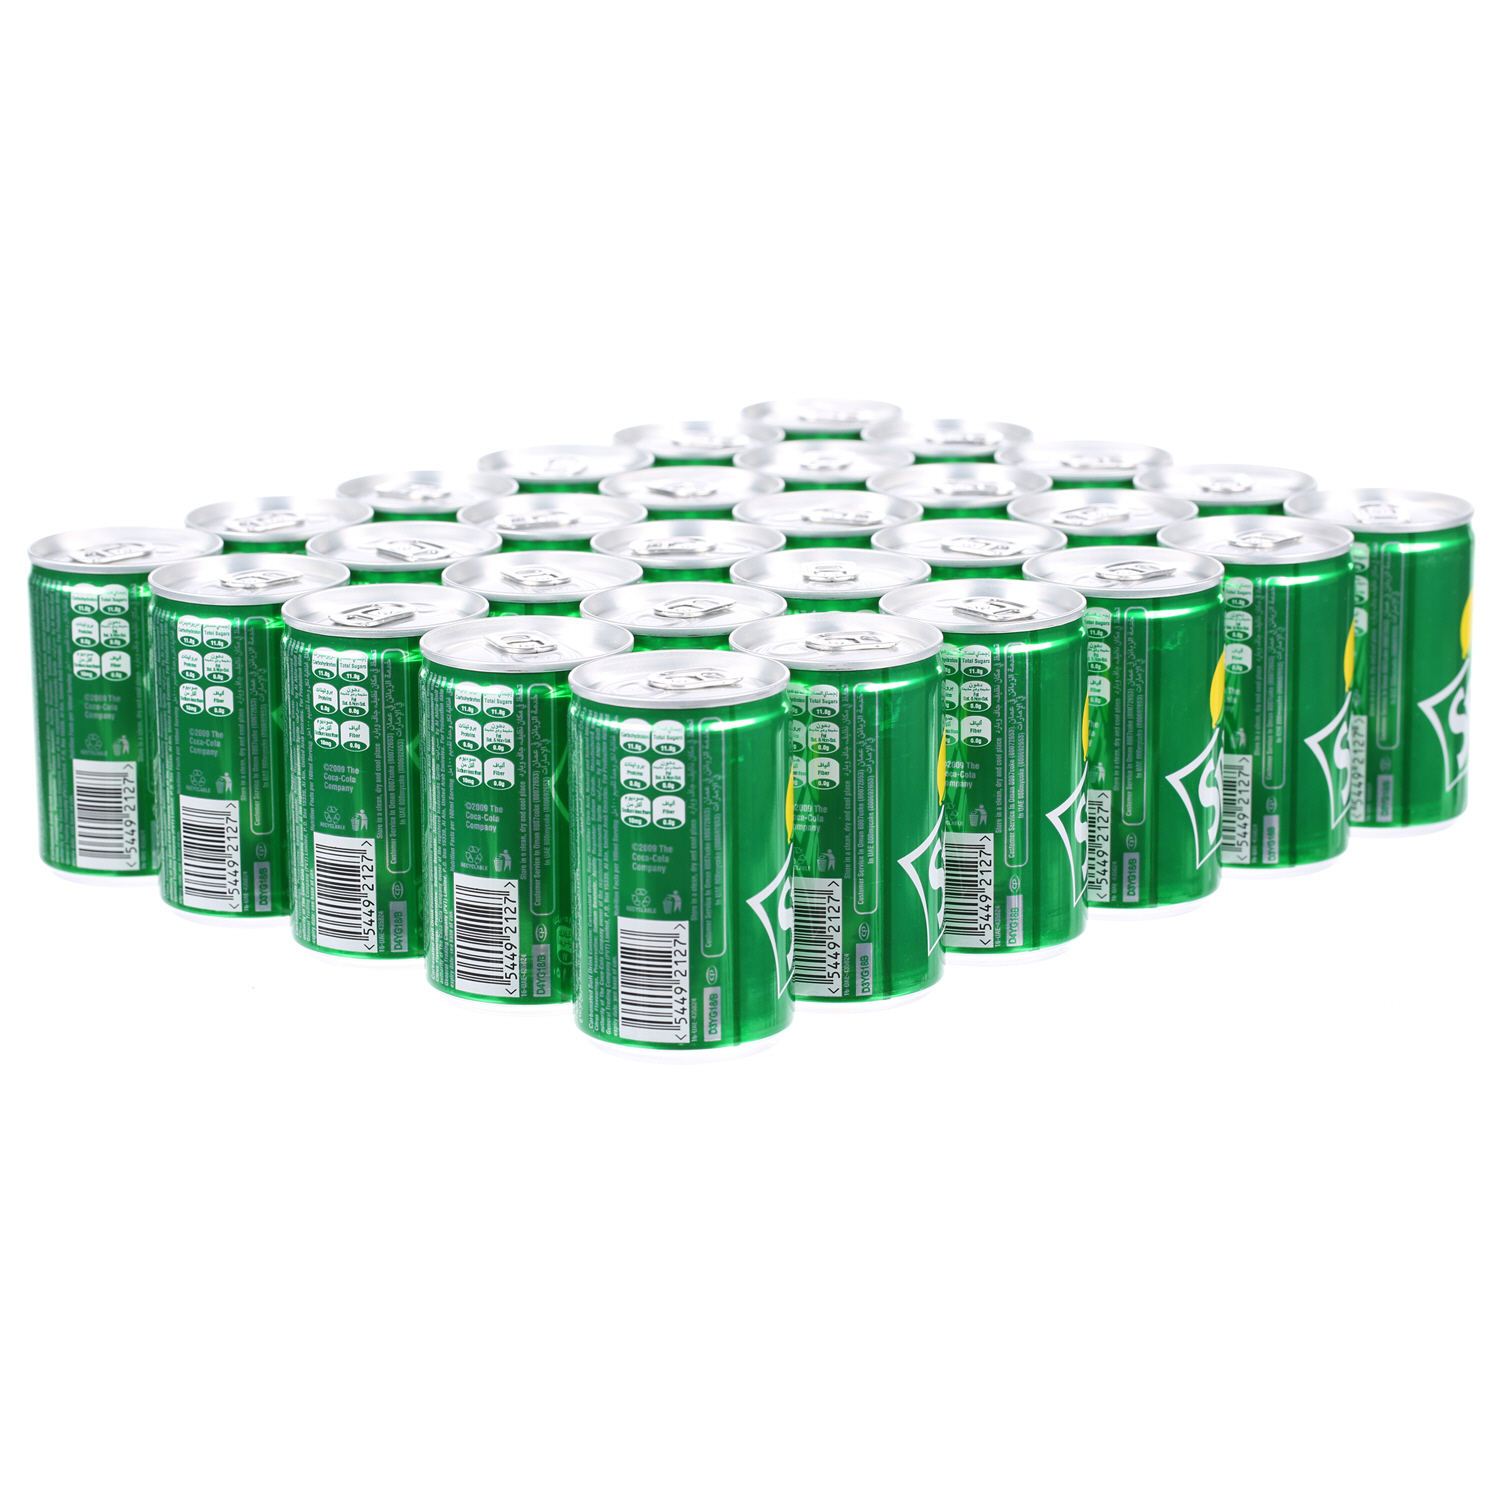 Sprite Can 150ml × 30'S